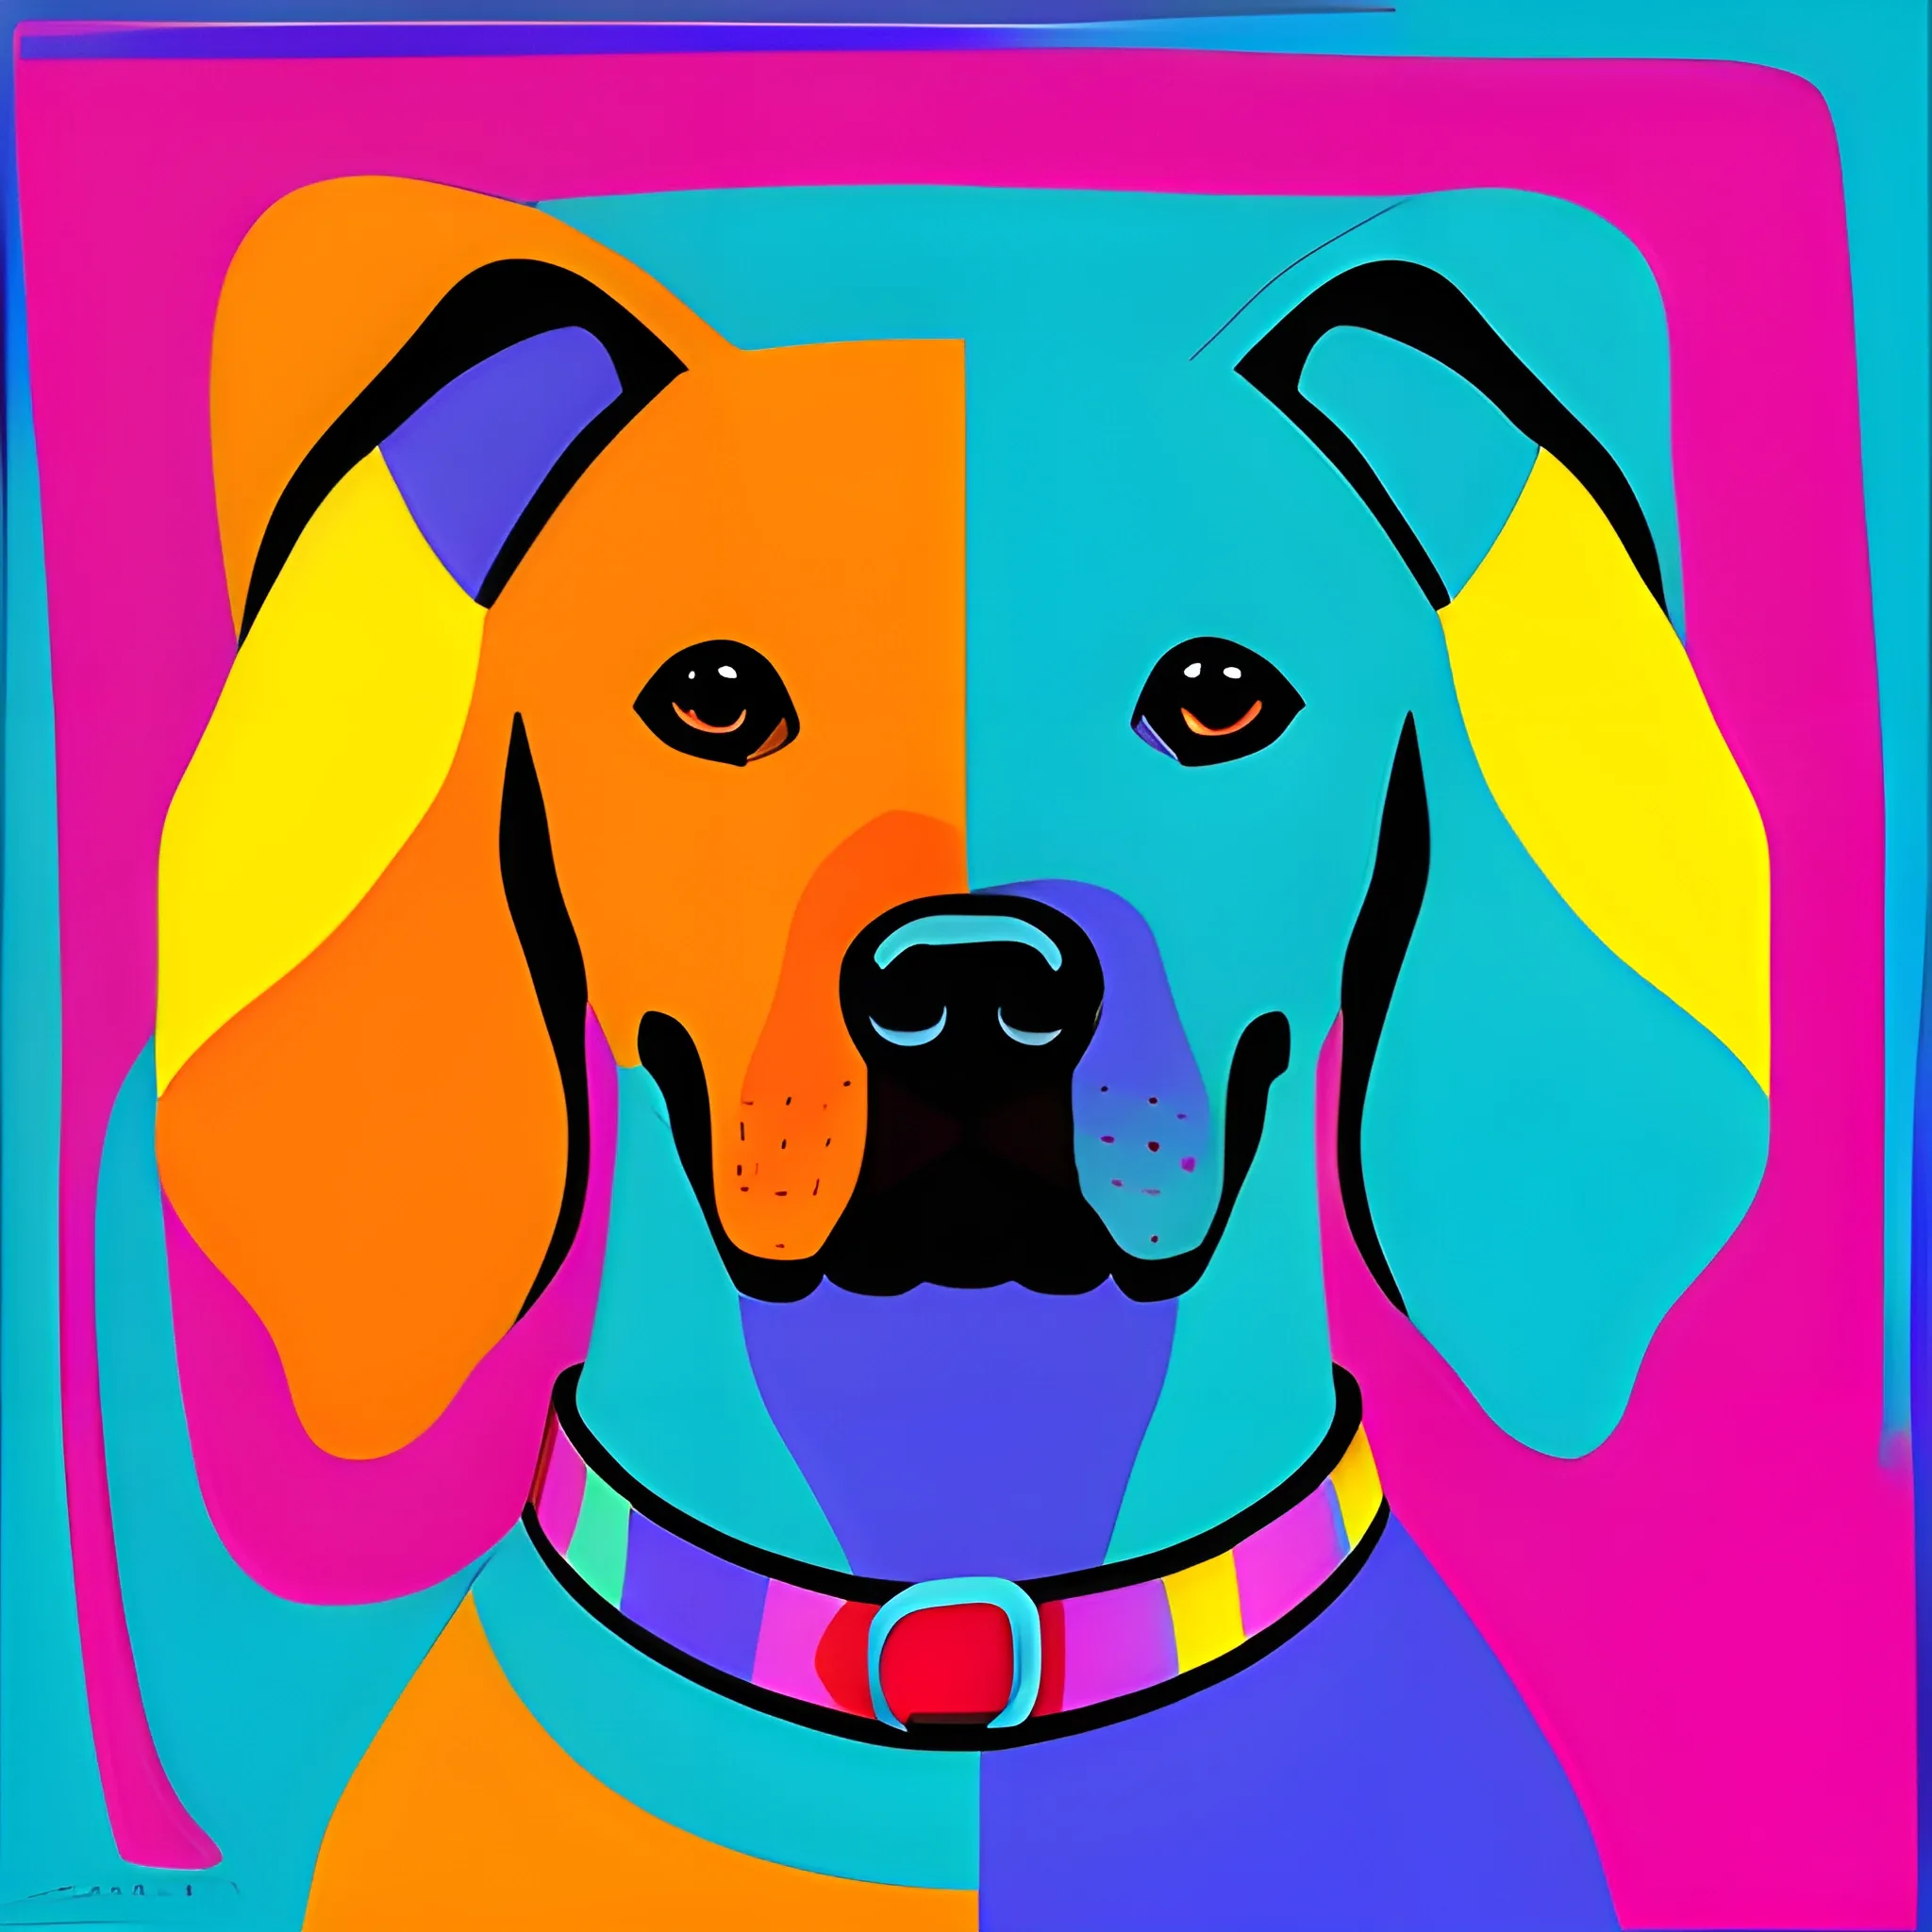 Create a modern rock album cover with colors, where there is a dog in love with a dog, cartoon type, get inspired by the elegance of modern art and make everything as true to reality as possible.